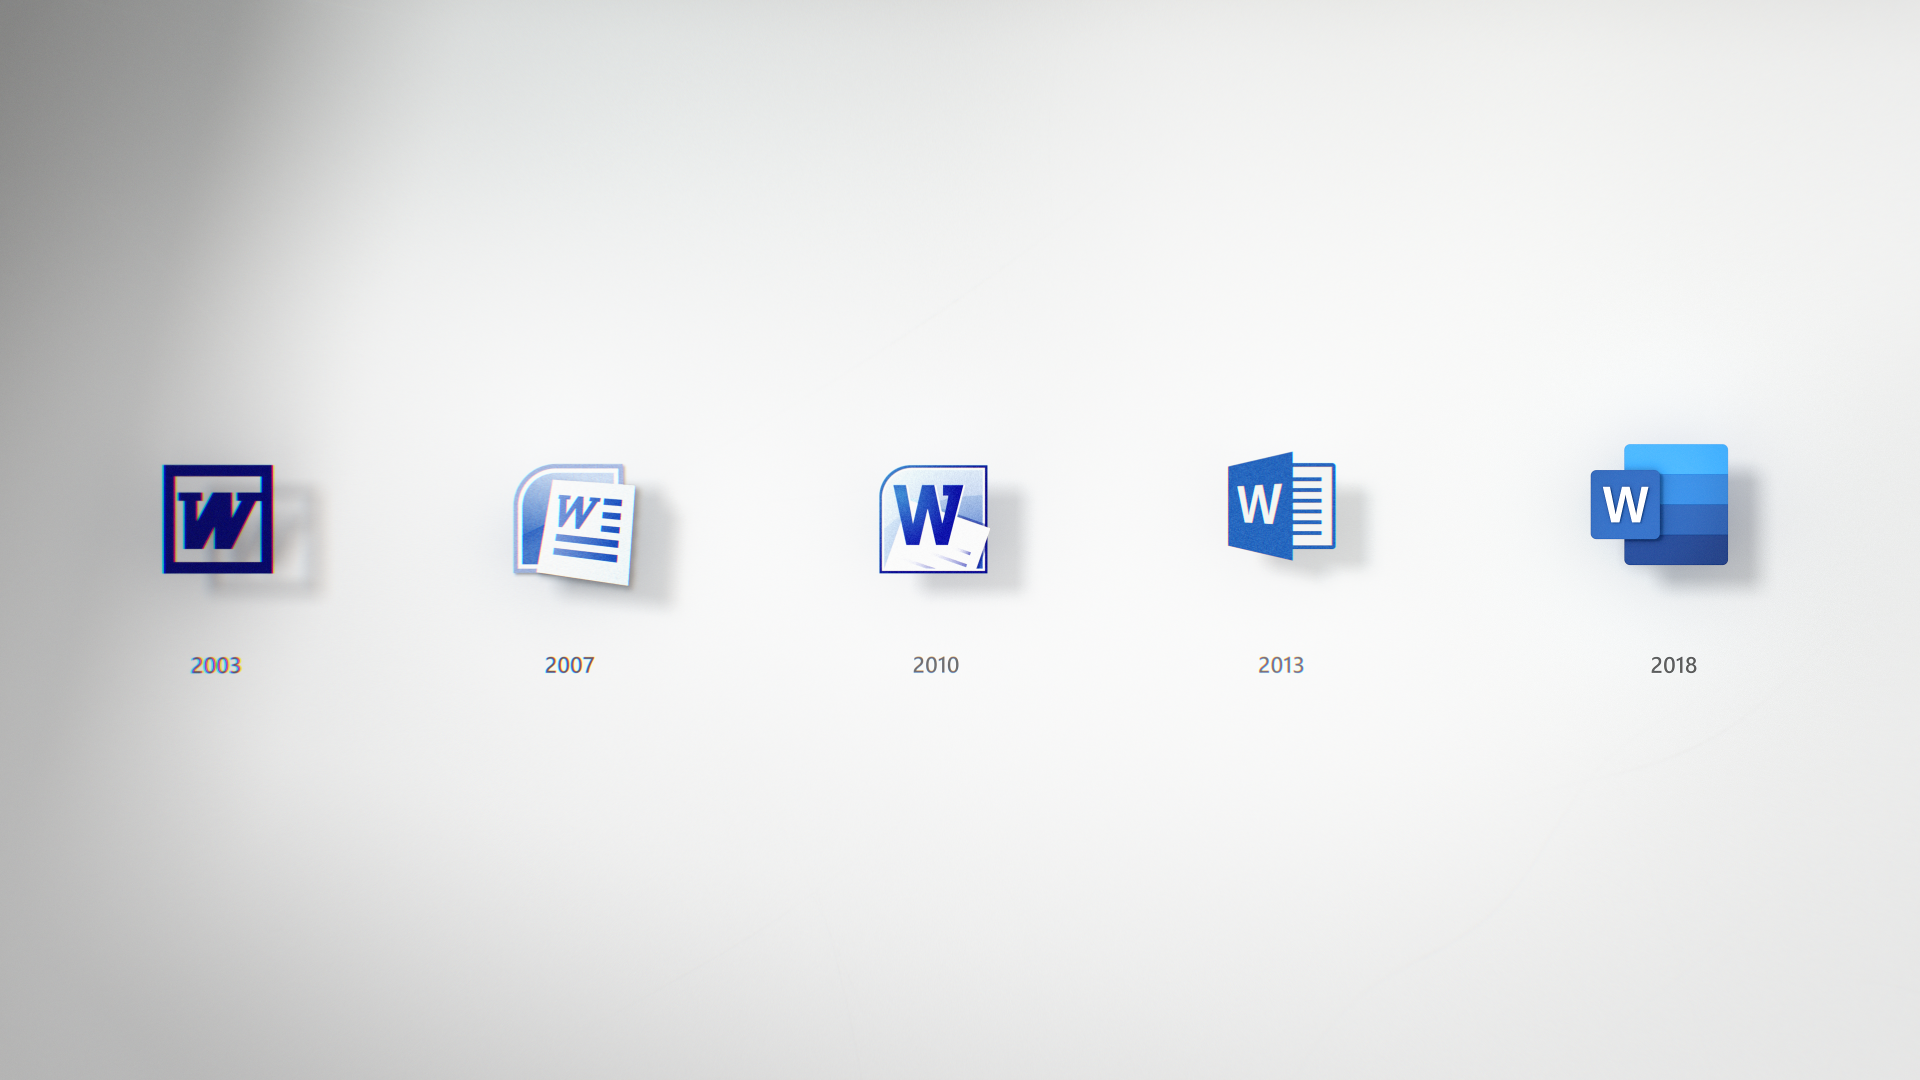 New Office icons